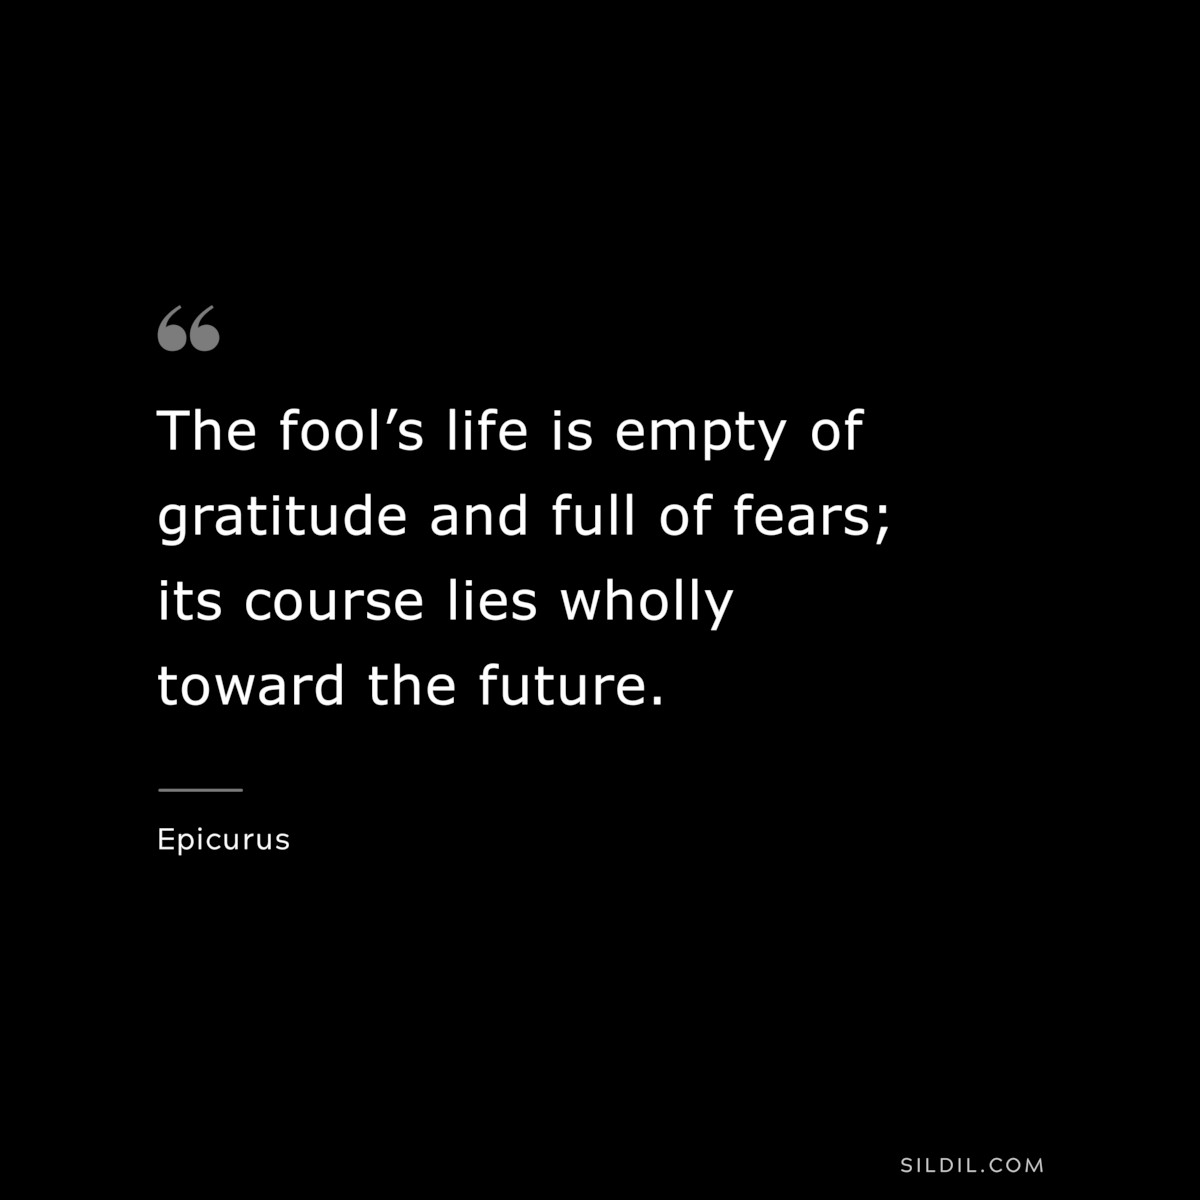 The fool’s life is empty of gratitude and full of fears; its course lies wholly toward the future. — Epicurus